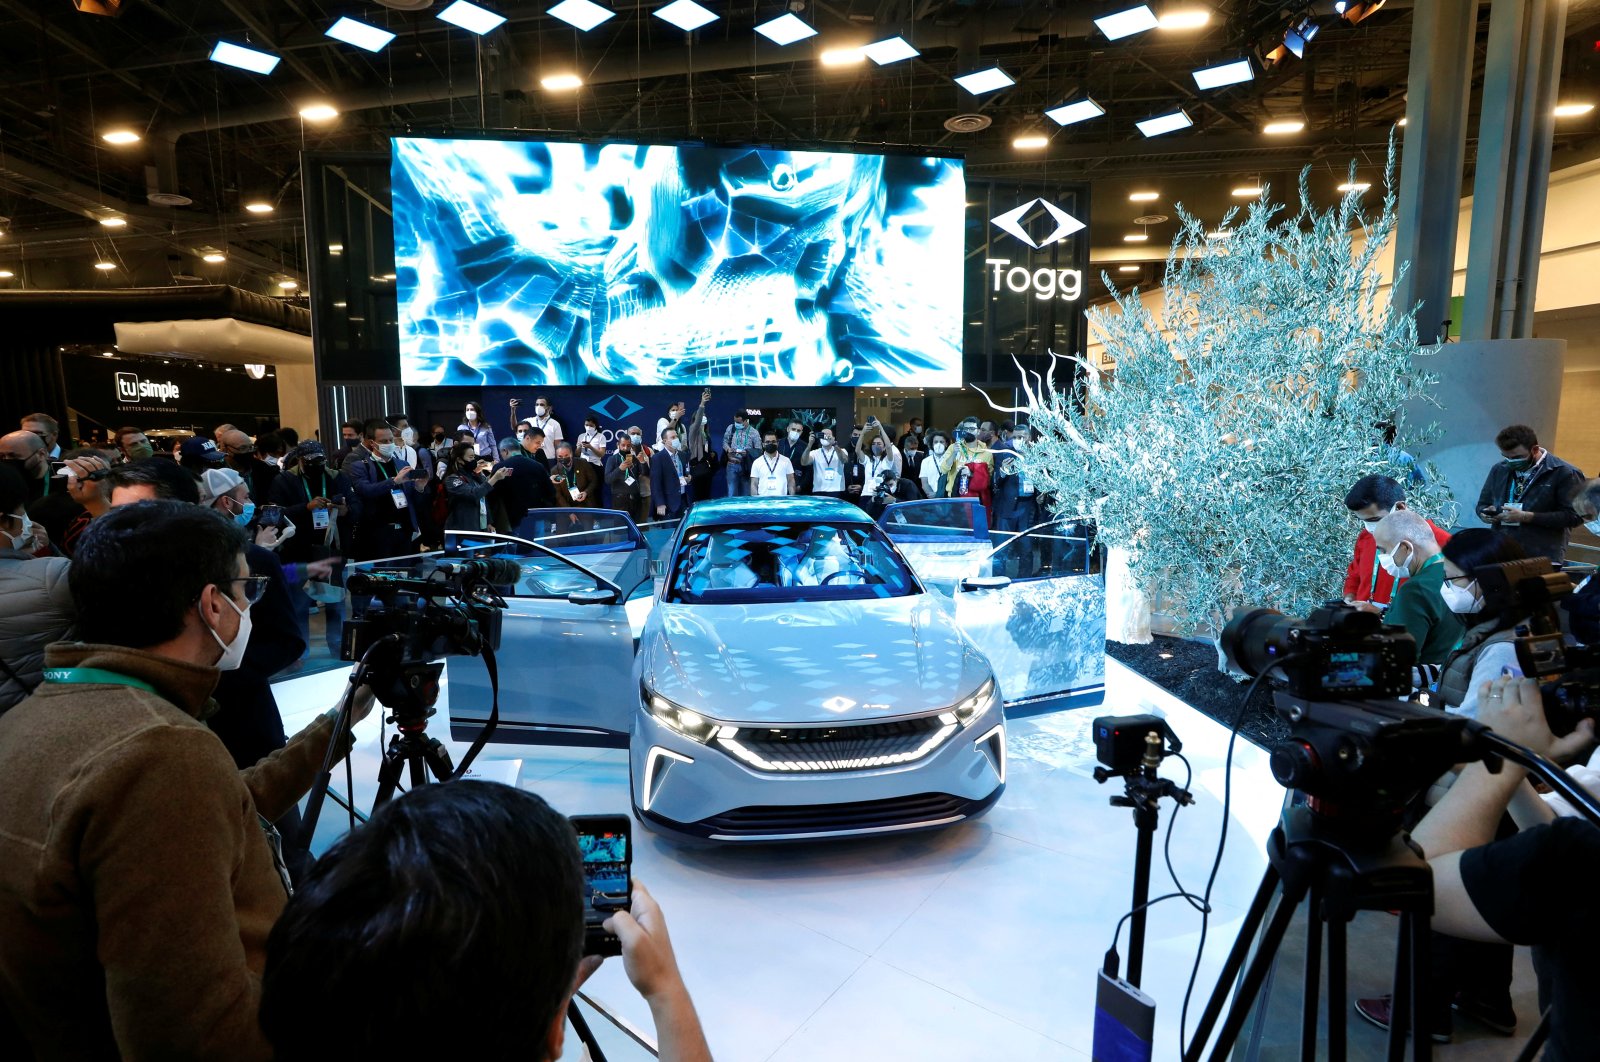 Attendees and journalists check out Togg&#039;s &quot;Transition Concept&quot; electric vehicle after it is unveiled during CES 2022 at the Las Vegas Convention Center in Las Vegas, Nevada, U.S., Jan. 5, 2022. (Reuters Photo)